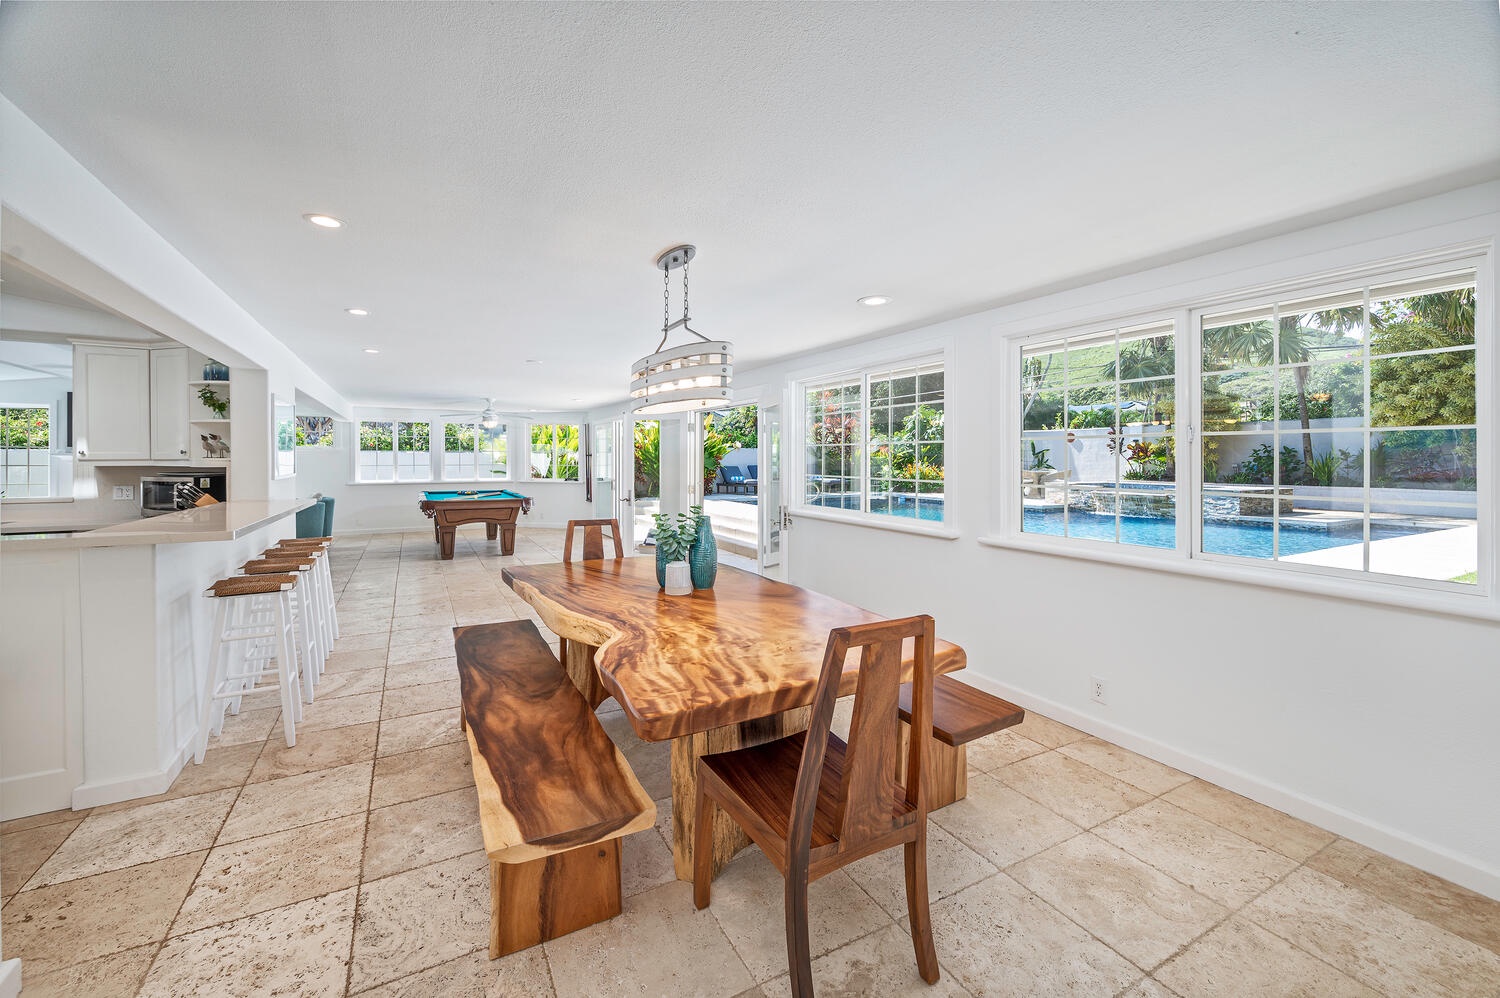 Kailua Vacation Rentals, Villa Hui Hou - Dinning room, the perfect place to entertain and dine at the same time!